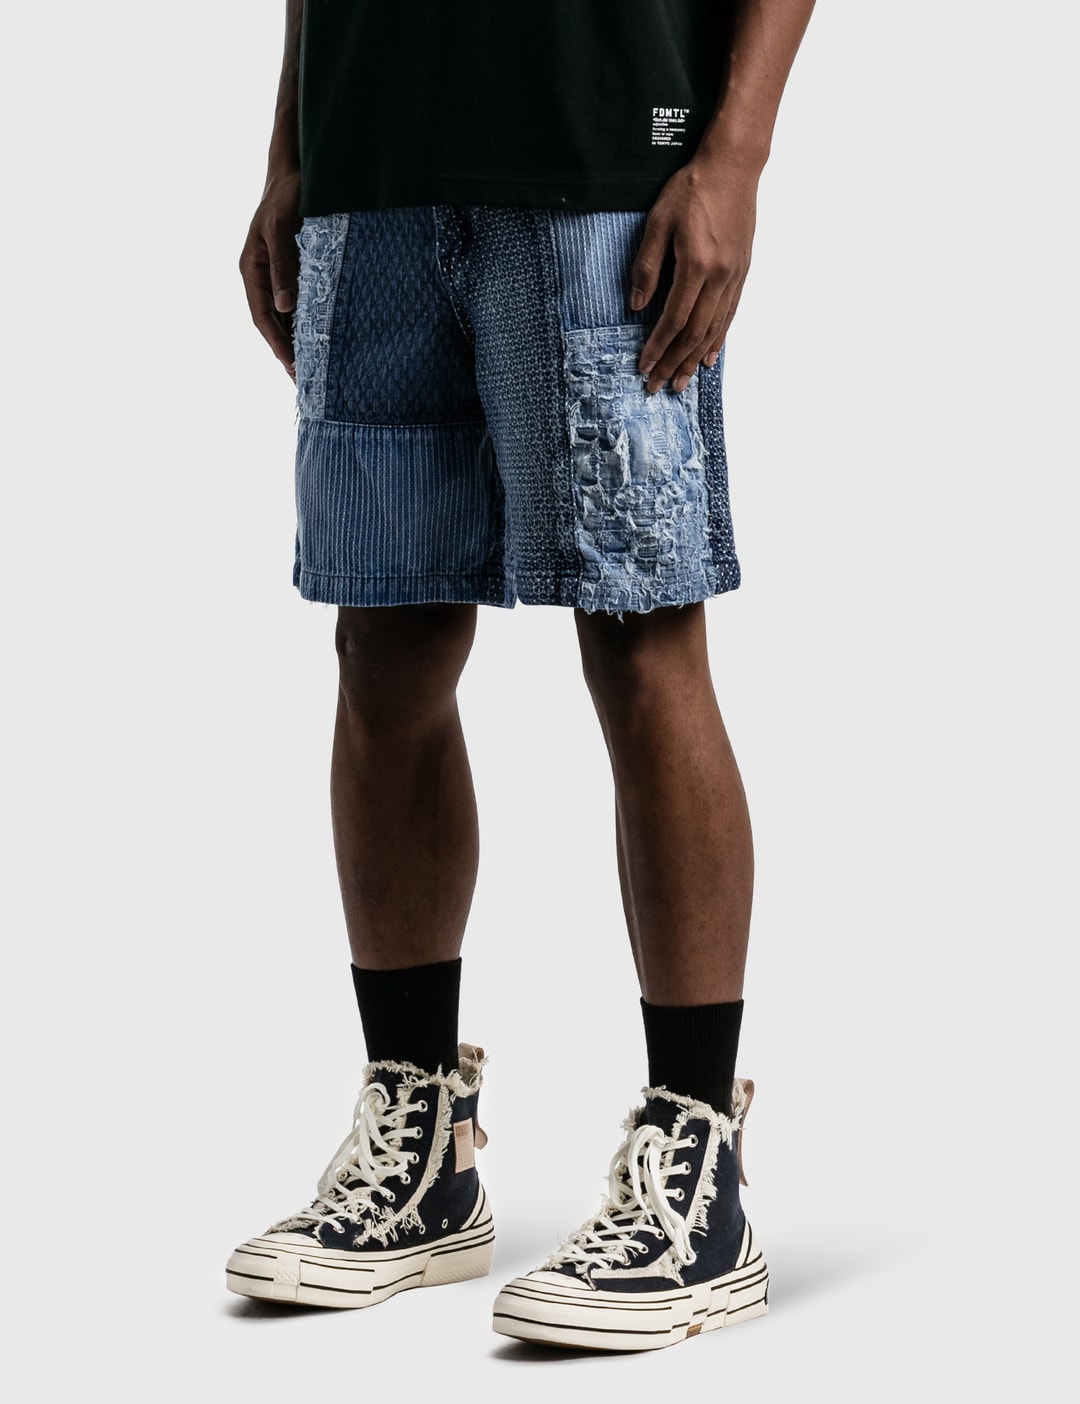 FDMTL - 10 Years Wash Patchwork Shorts | HBX - Globally Curated Fashion ...